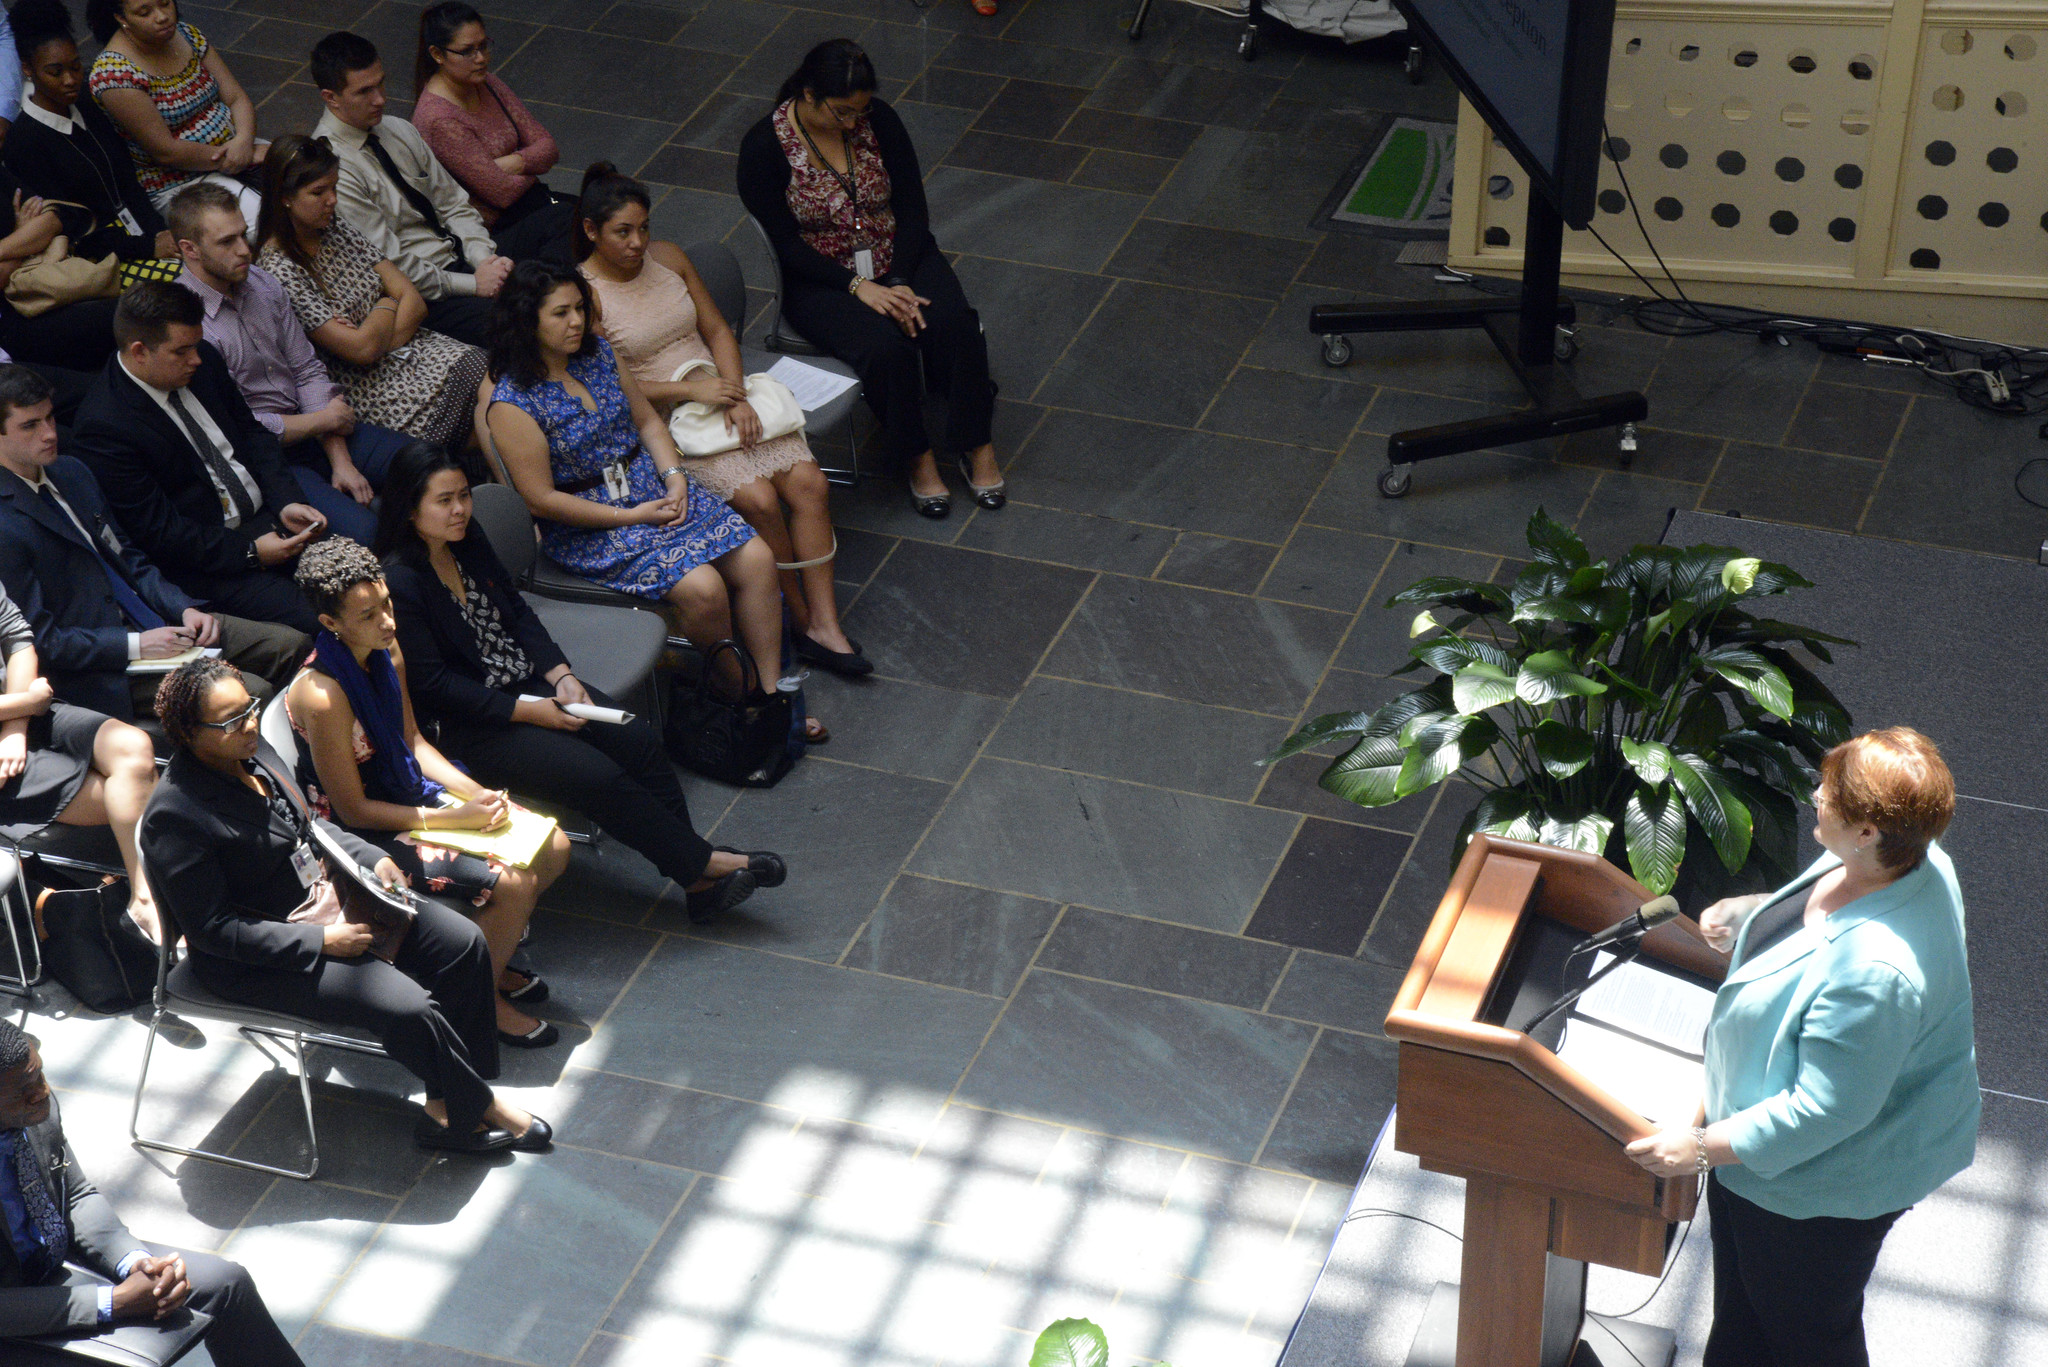 USDA’s Office of Human Resources Management Director Roberta Jeanquart speaks to the USDA Interns at the welcoming program held in the USDA Whitten Building in Washington, D.C. on Wednesday, Jun. 29, 2016